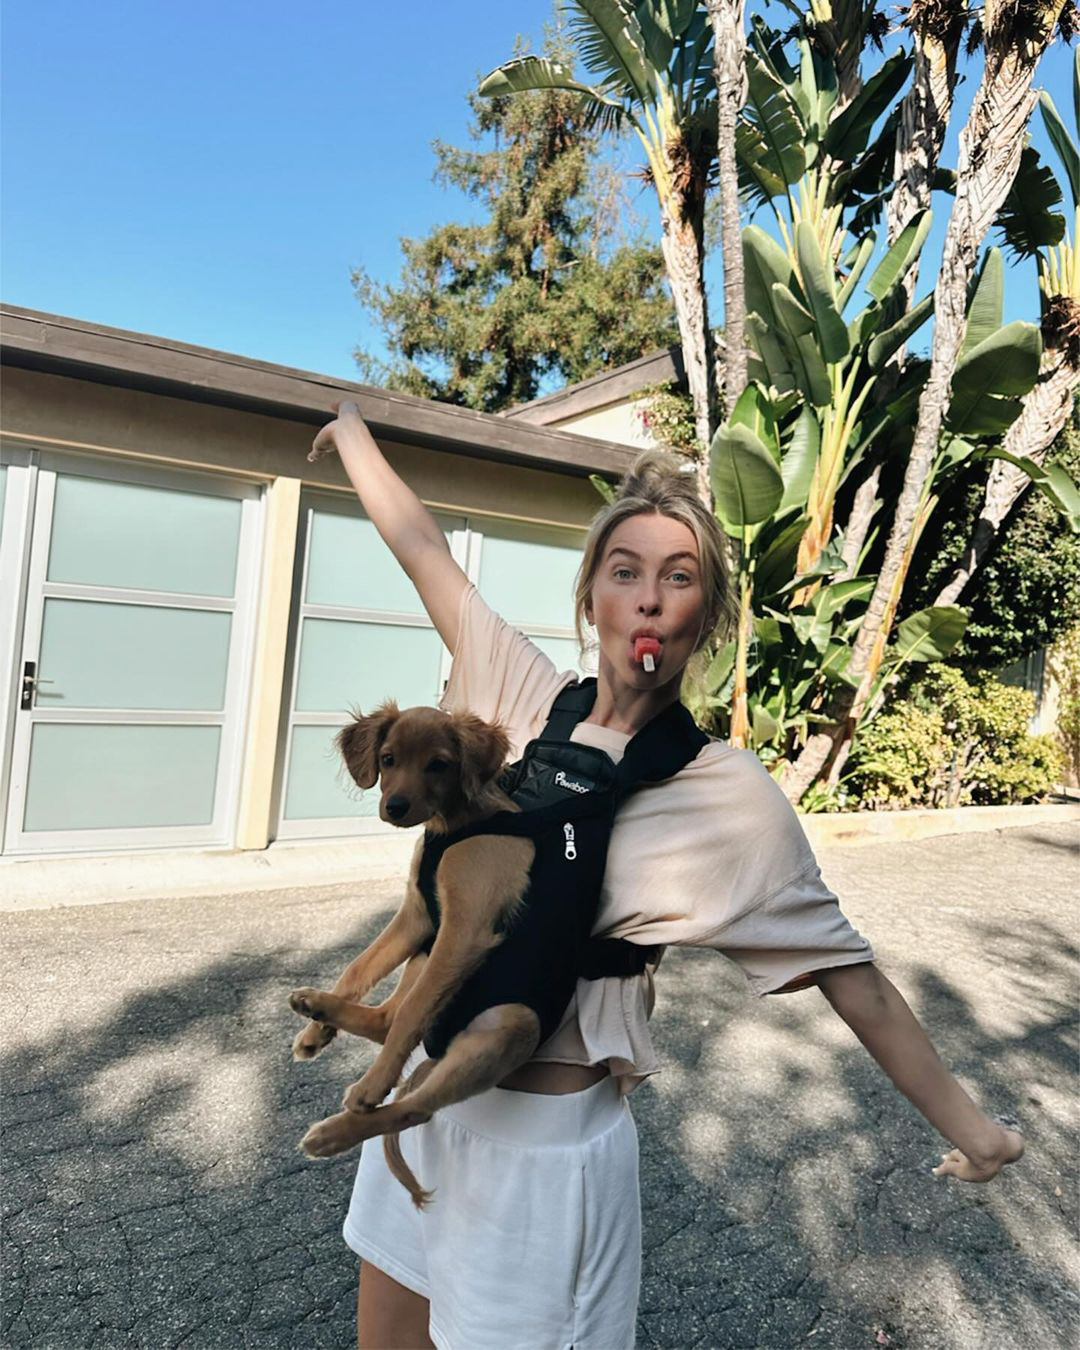 Julianne pictured with her dog Sunny